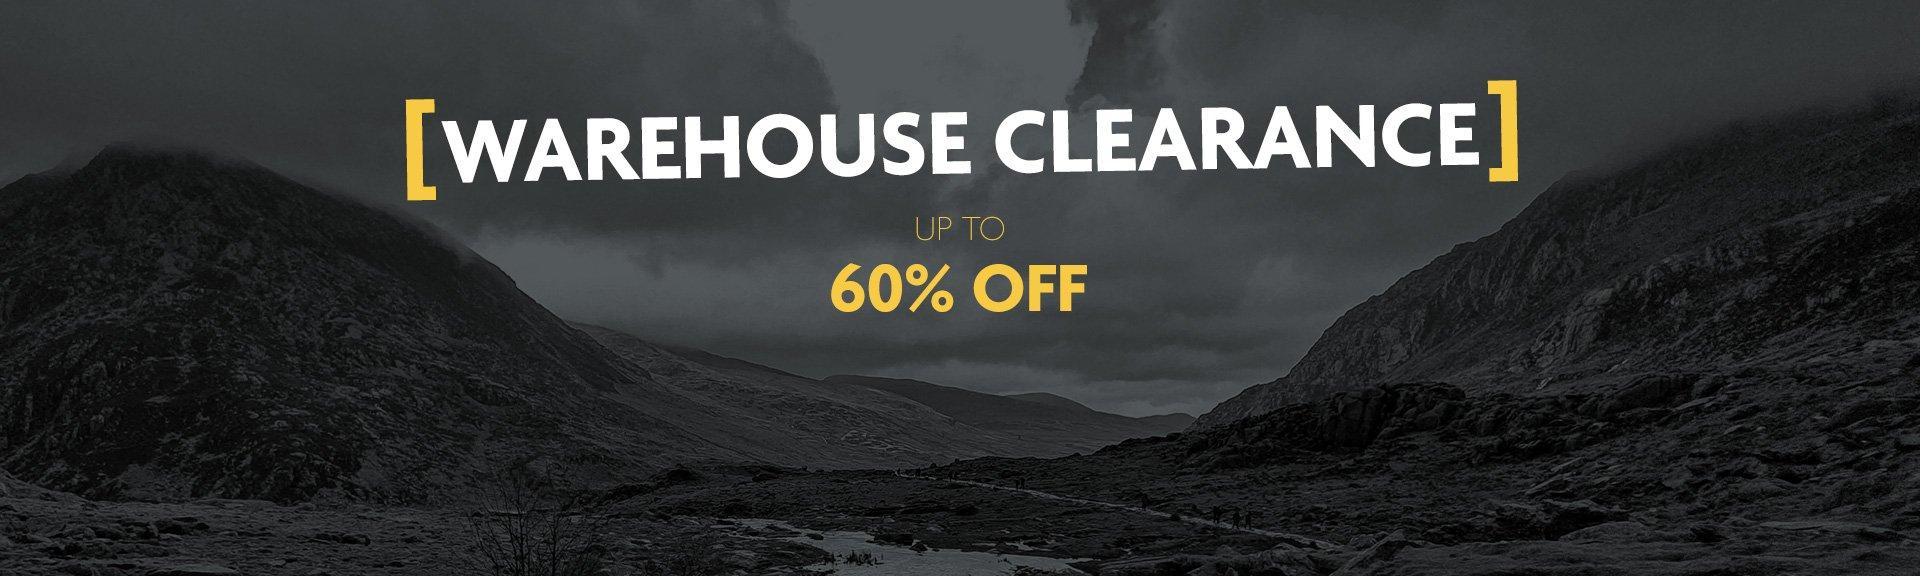 Warehouse Clearance - Up To 60% OFF